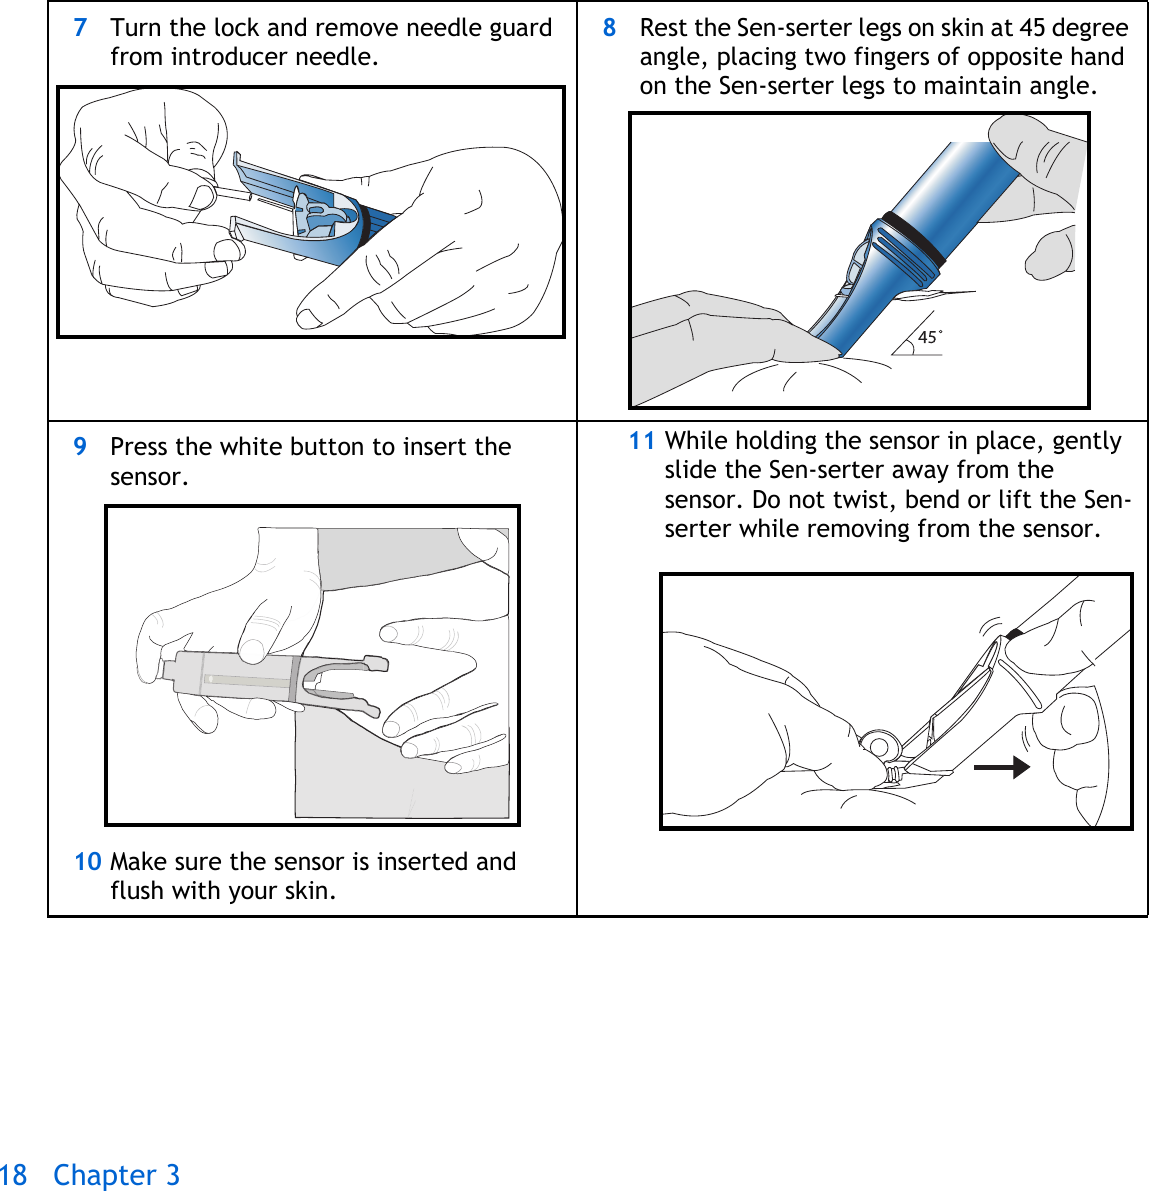 18 Chapter 3 7Turn the lock and remove needle guard from introducer needle.8Rest the Sen-serter legs on skin at 45 degree angle, placing two fingers of opposite hand on the Sen-serter legs to maintain angle.9Press the white button to insert the sensor. 10 Make sure the sensor is inserted and flush with your skin.11 While holding the sensor in place, gently slide the Sen-serter away from the sensor. Do not twist, bend or lift the Sen-serter while removing from the sensor.